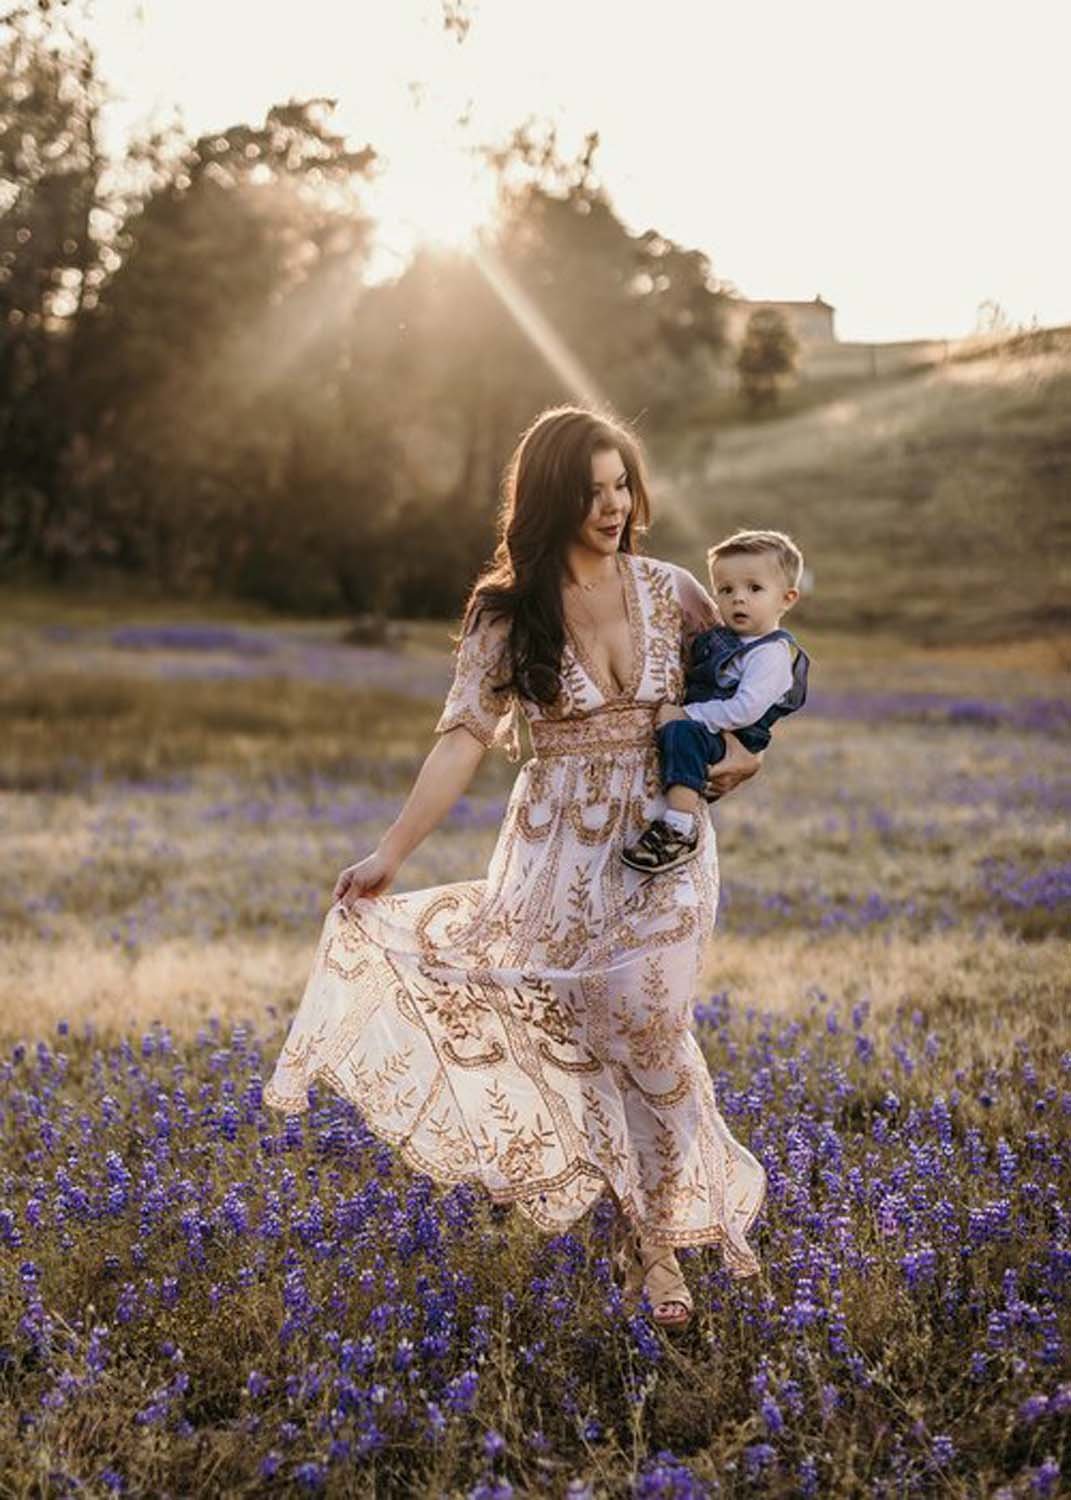 Mother carrying young boy in field of flowers Sacramento family photo studio.jpg